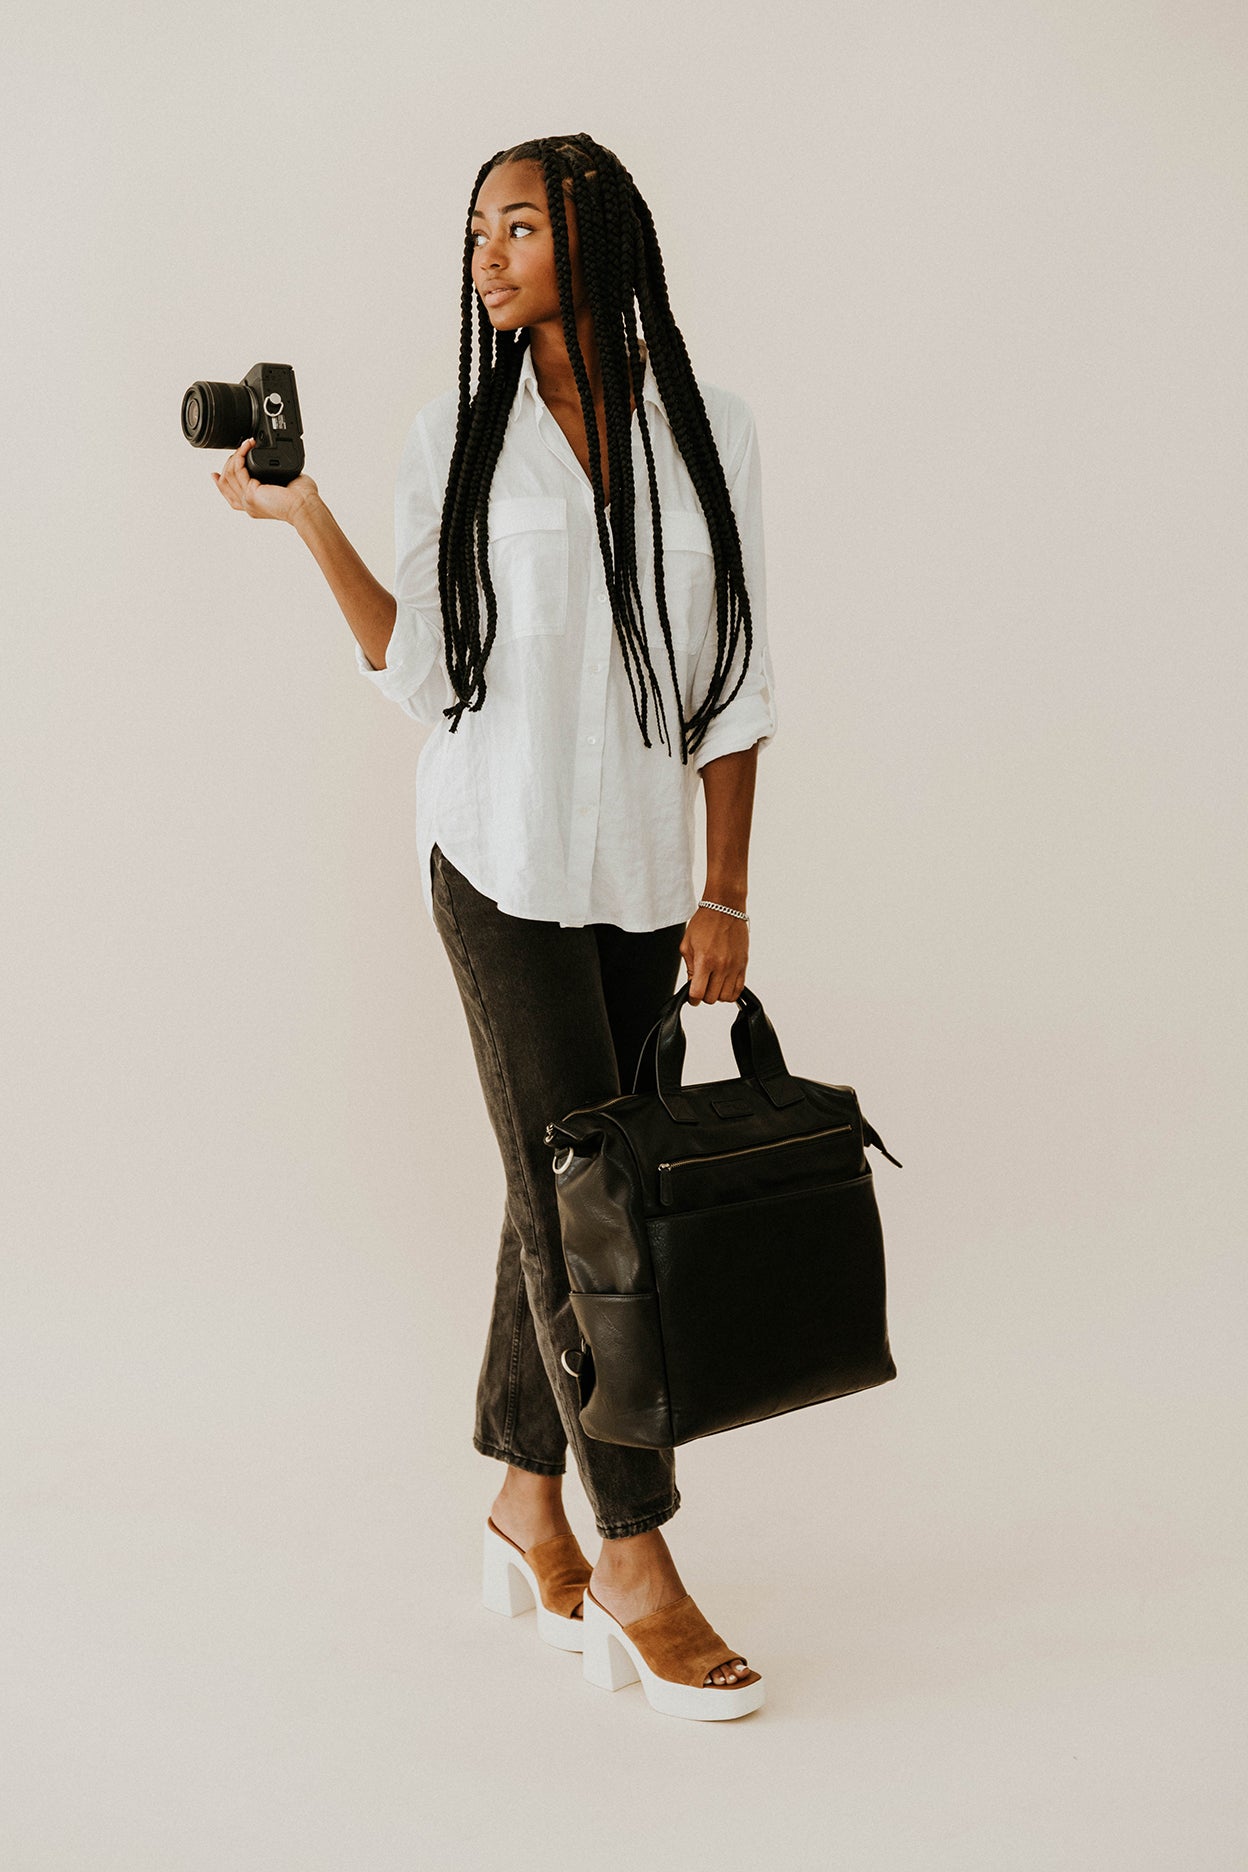 The Courtney - Our Full Size Versatile Camera Bag (Brown is a pre-order for February Delivery) Black is in stock.